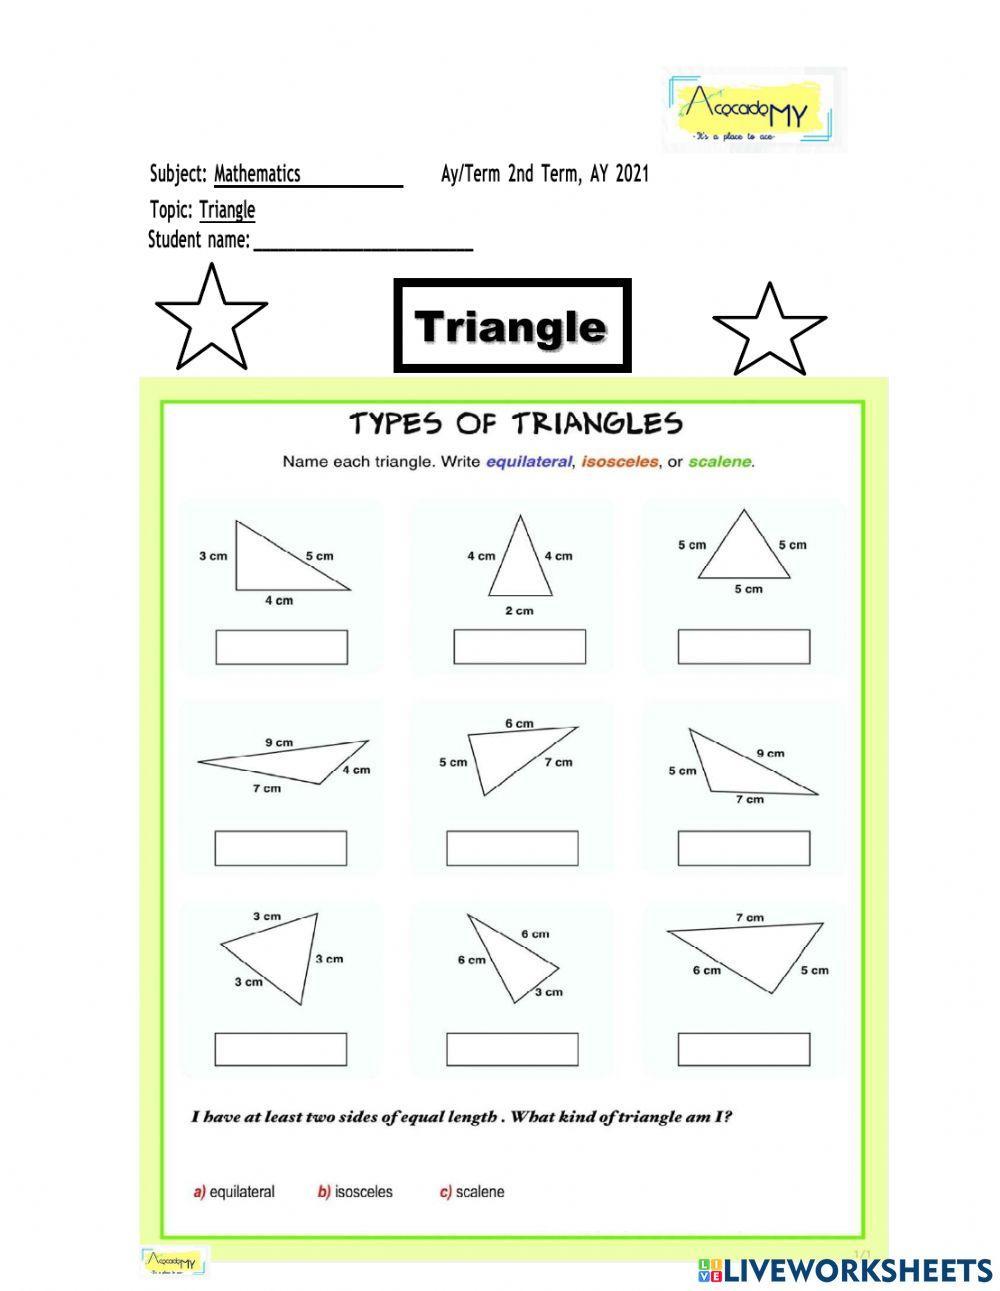 Shapes-Triangle interactive worksheet